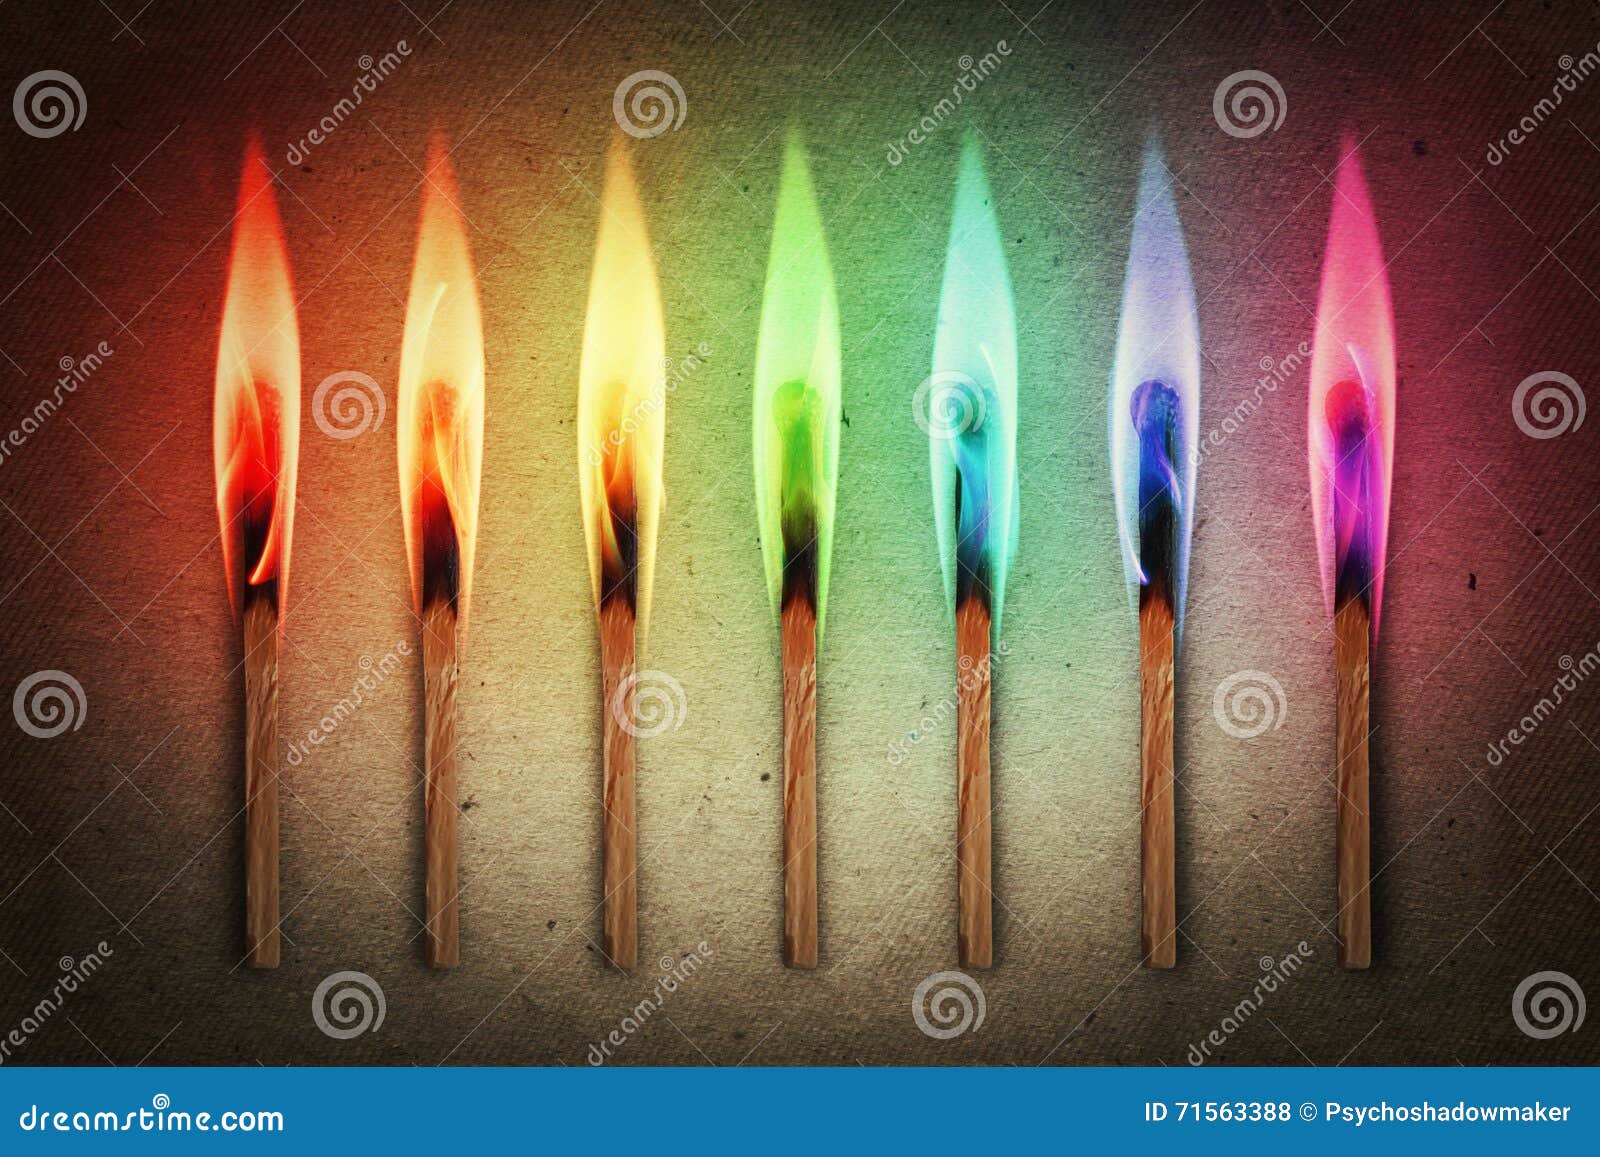 Full of Fire Rainbow Matches